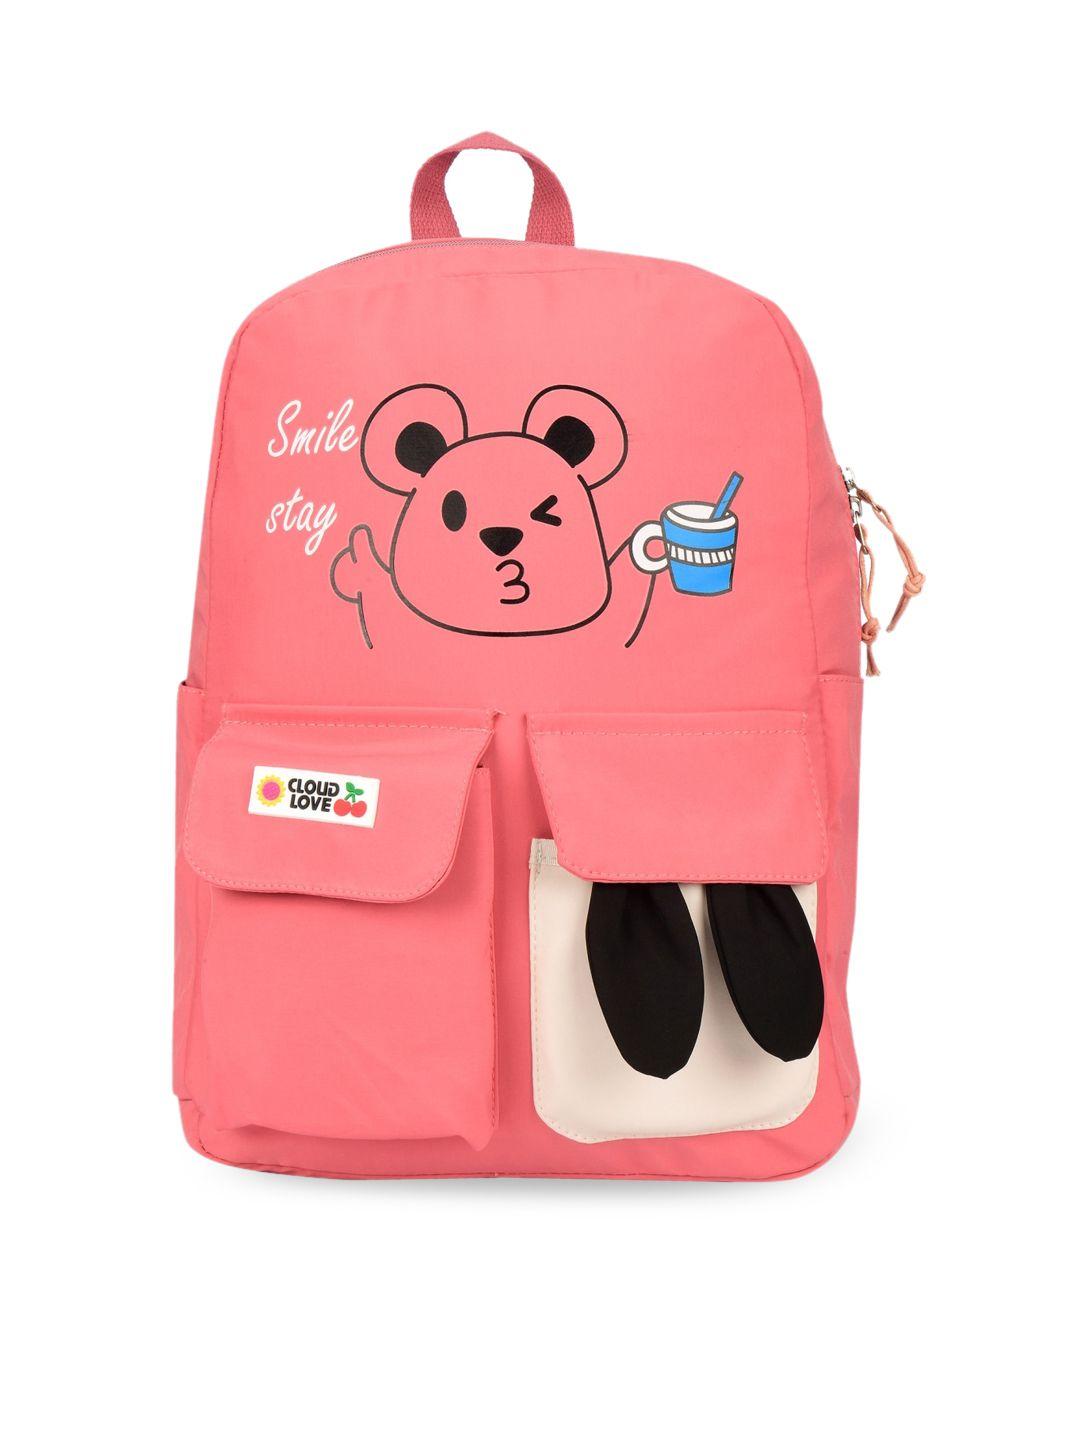 kids on board kids pink double pocket 18 inches bagpack